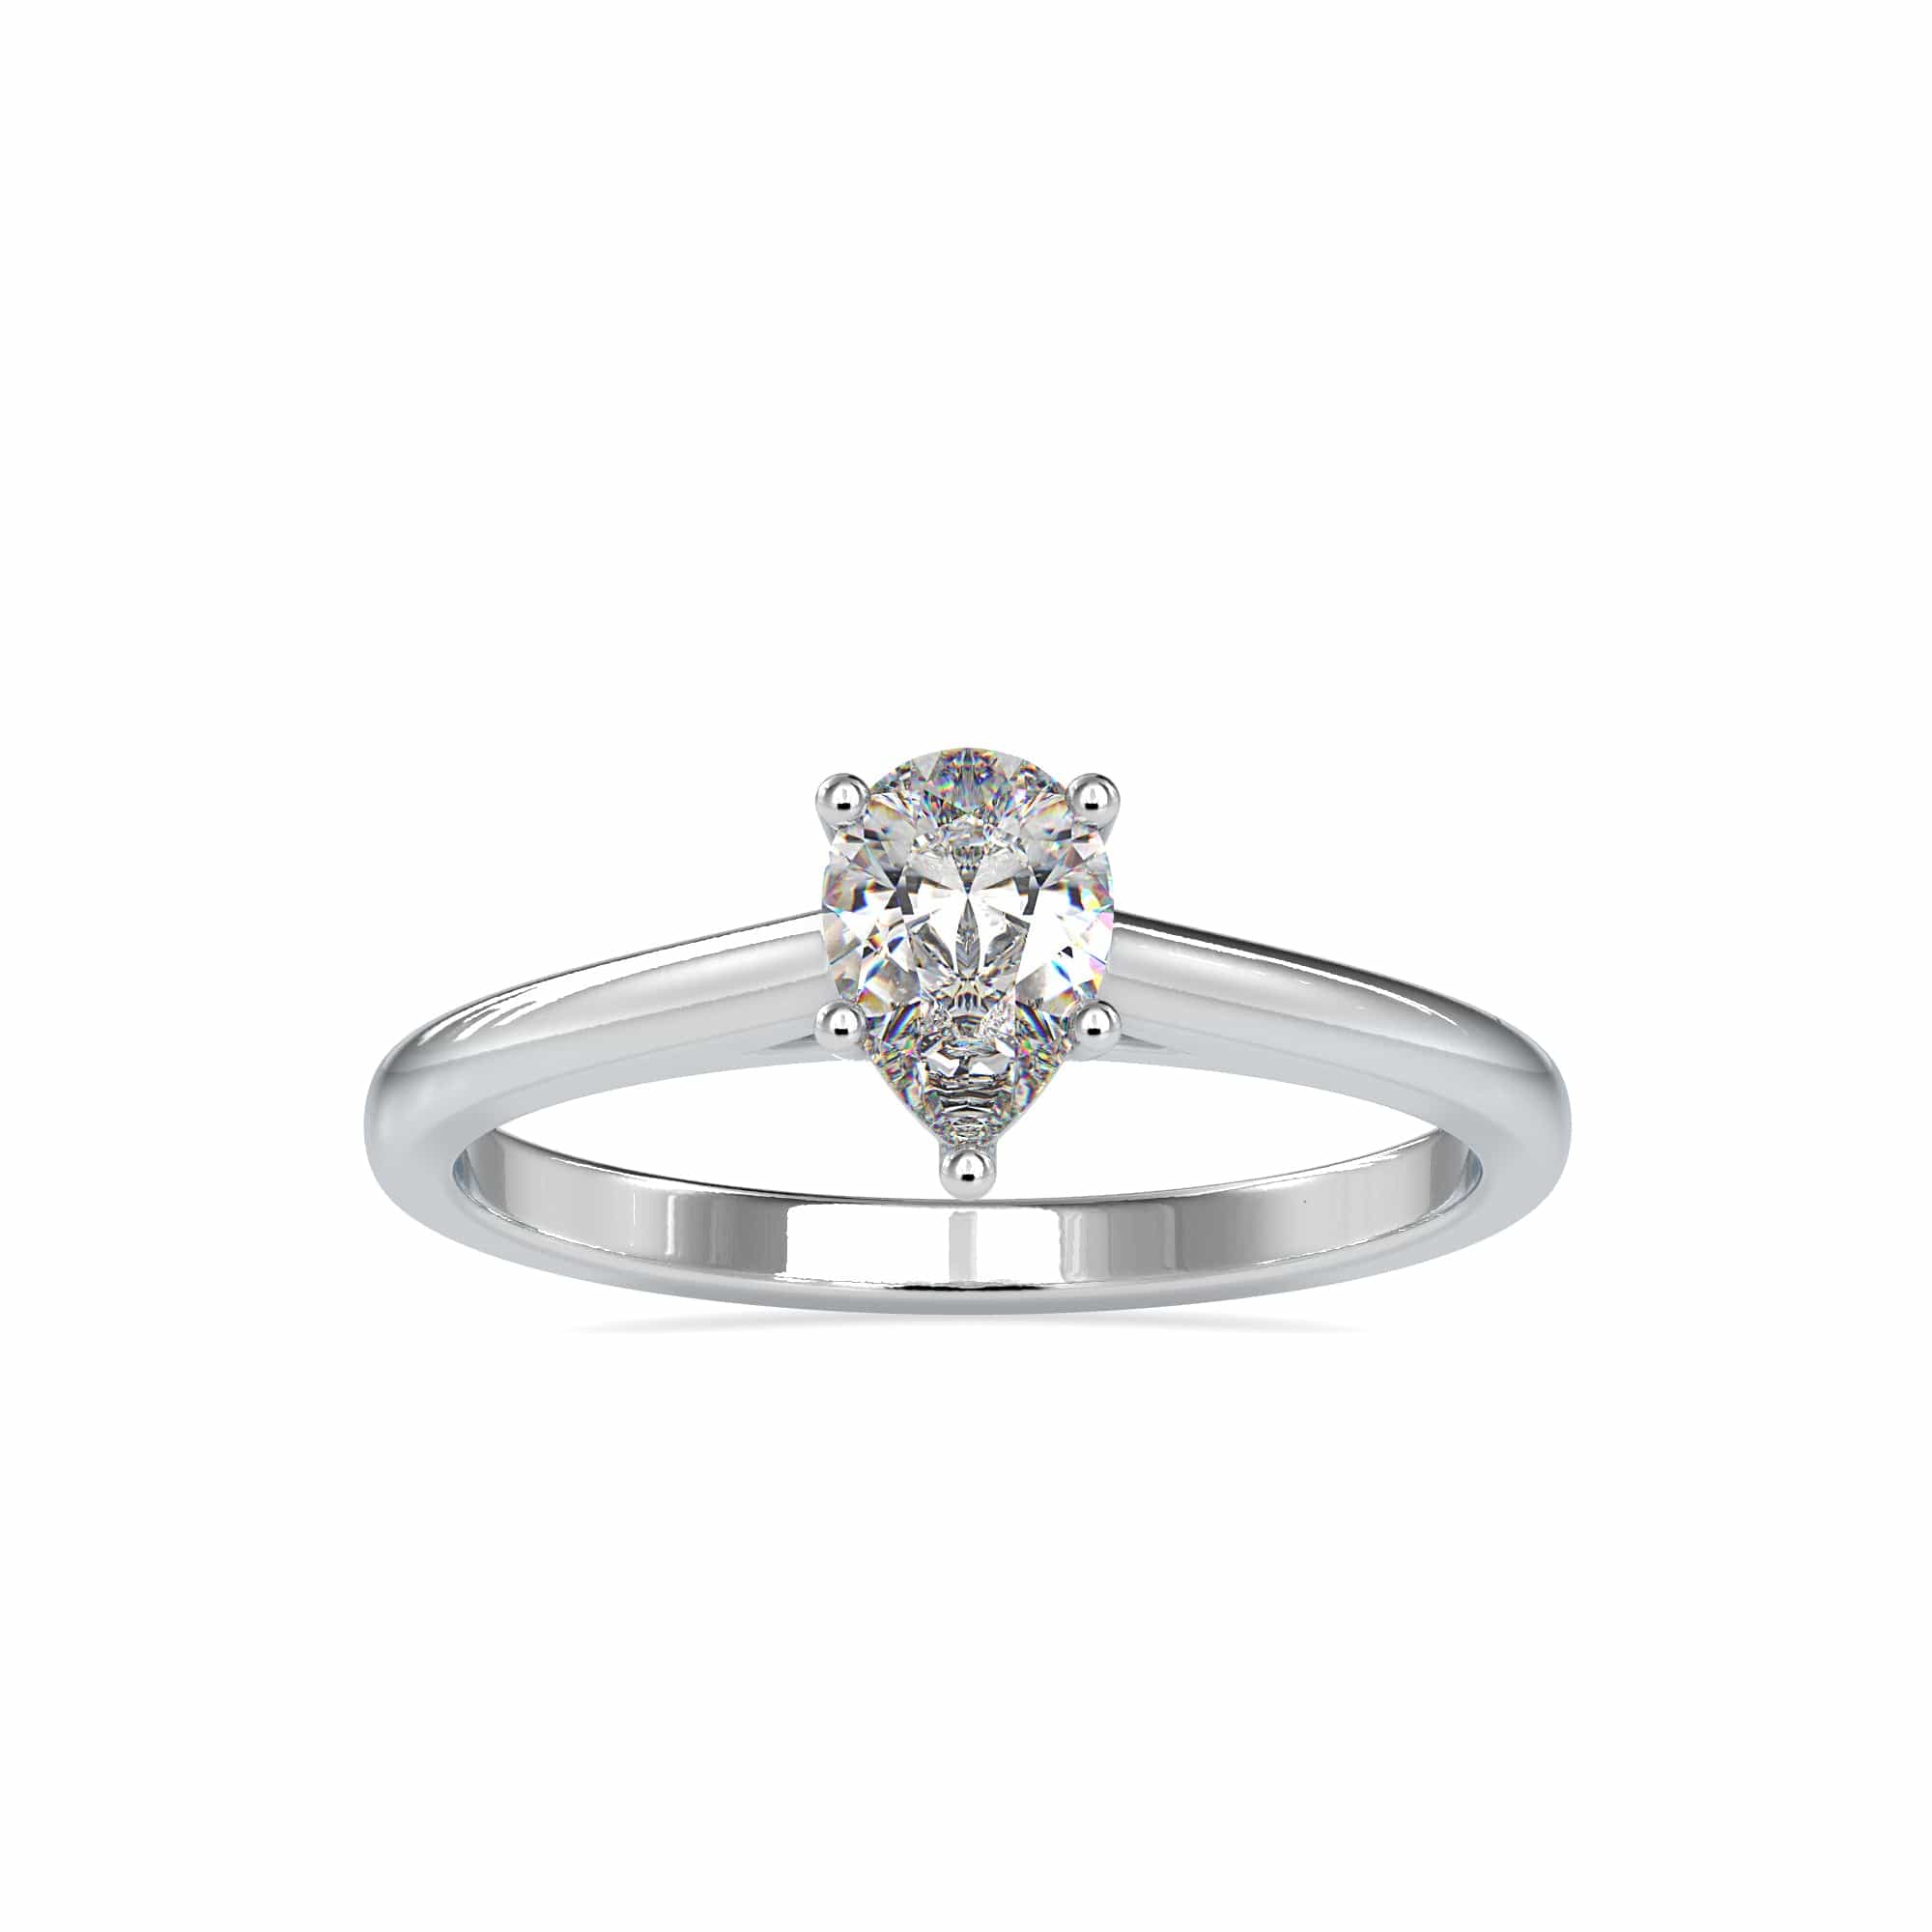 Parl Fashion Women's Pear Cut Diamond Engagement Ring at Rs 33680 in Surat